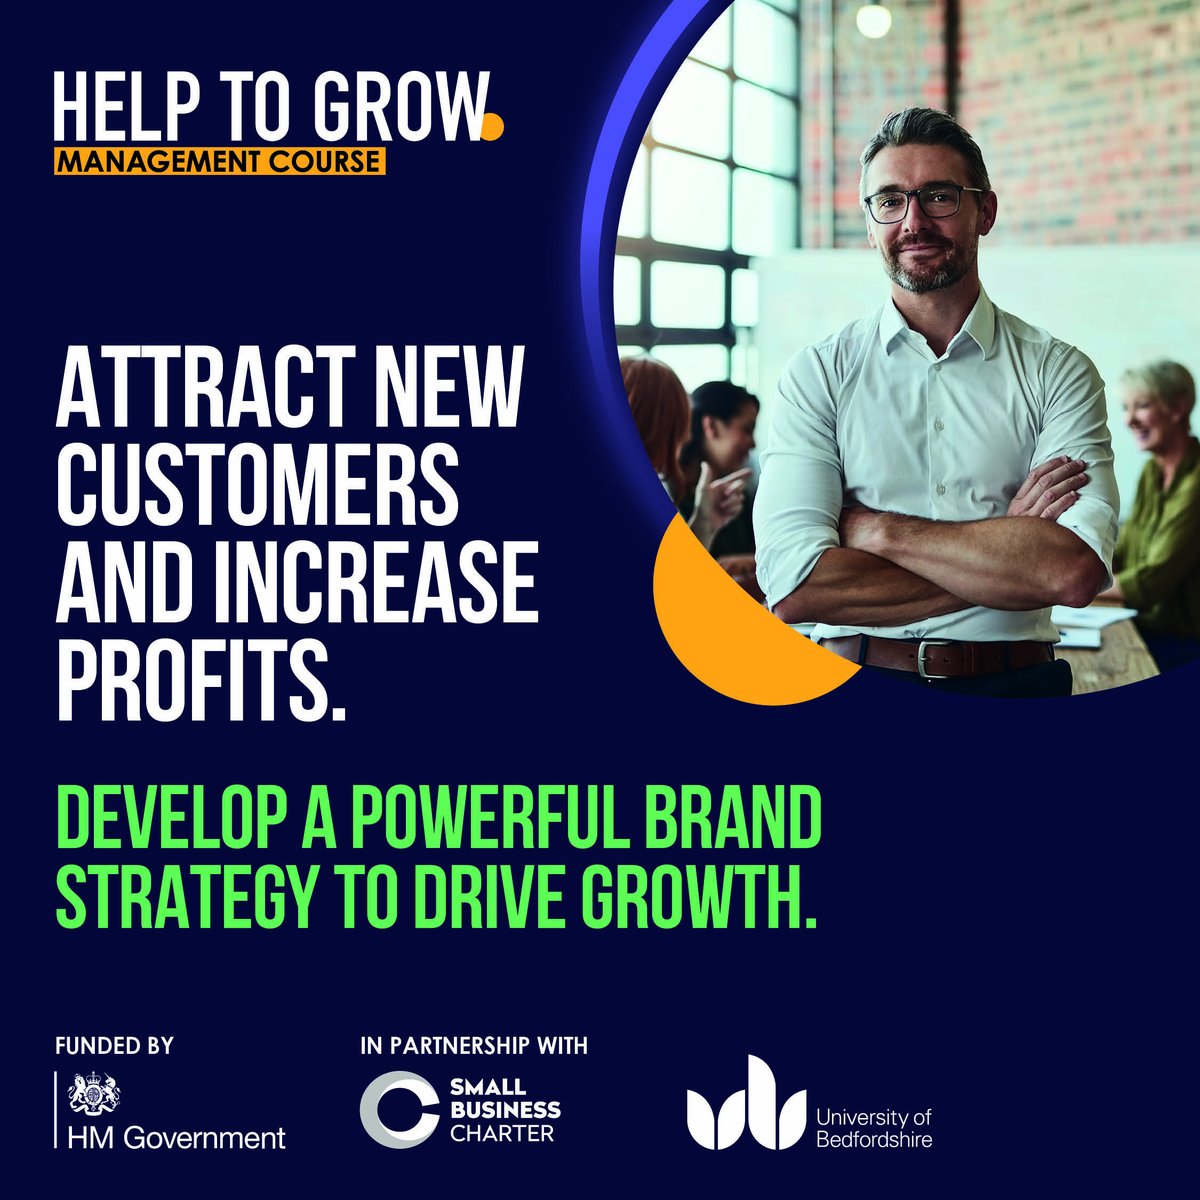 Seeking expert training, mentorship, and peer-learning opportunities?
With the 90% subsidised #HelptoGrow course you can take your business to the next level.
Find out more and to register: beds.ac.uk/help2grow
#businessgrowth #leadershiptraining